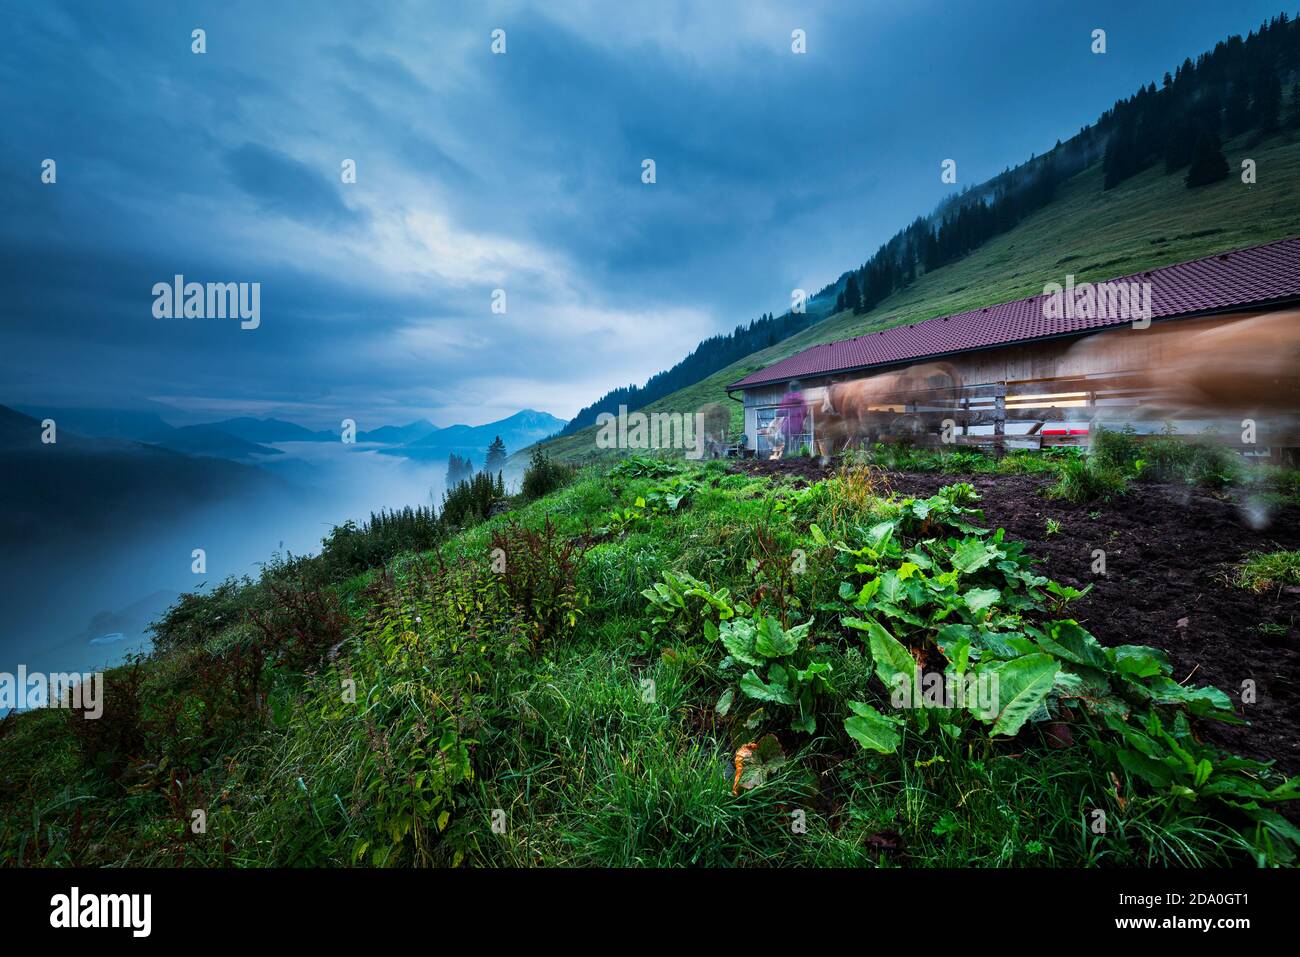 Cows on an alpine pasture landscape at dawn are driven home for milking in the barn, Ackernalm, Tyrol, Austria Stock Photo